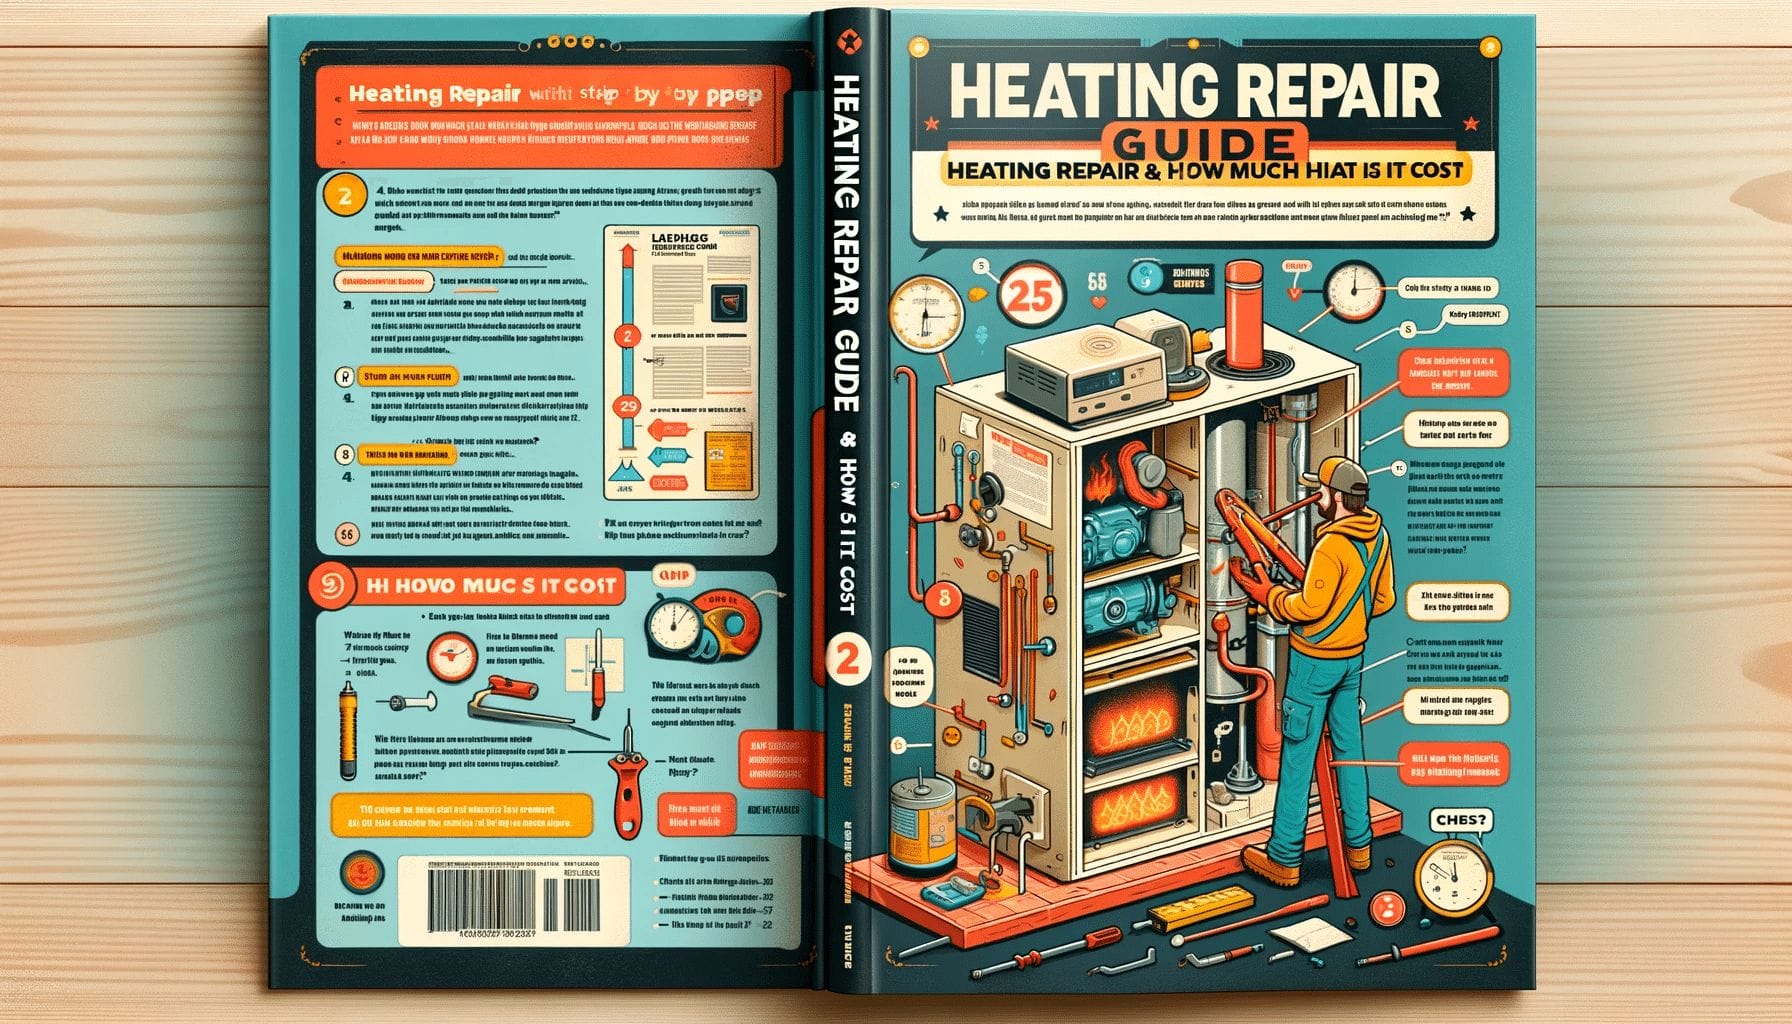 A book with illustrations of a heating repair guide.